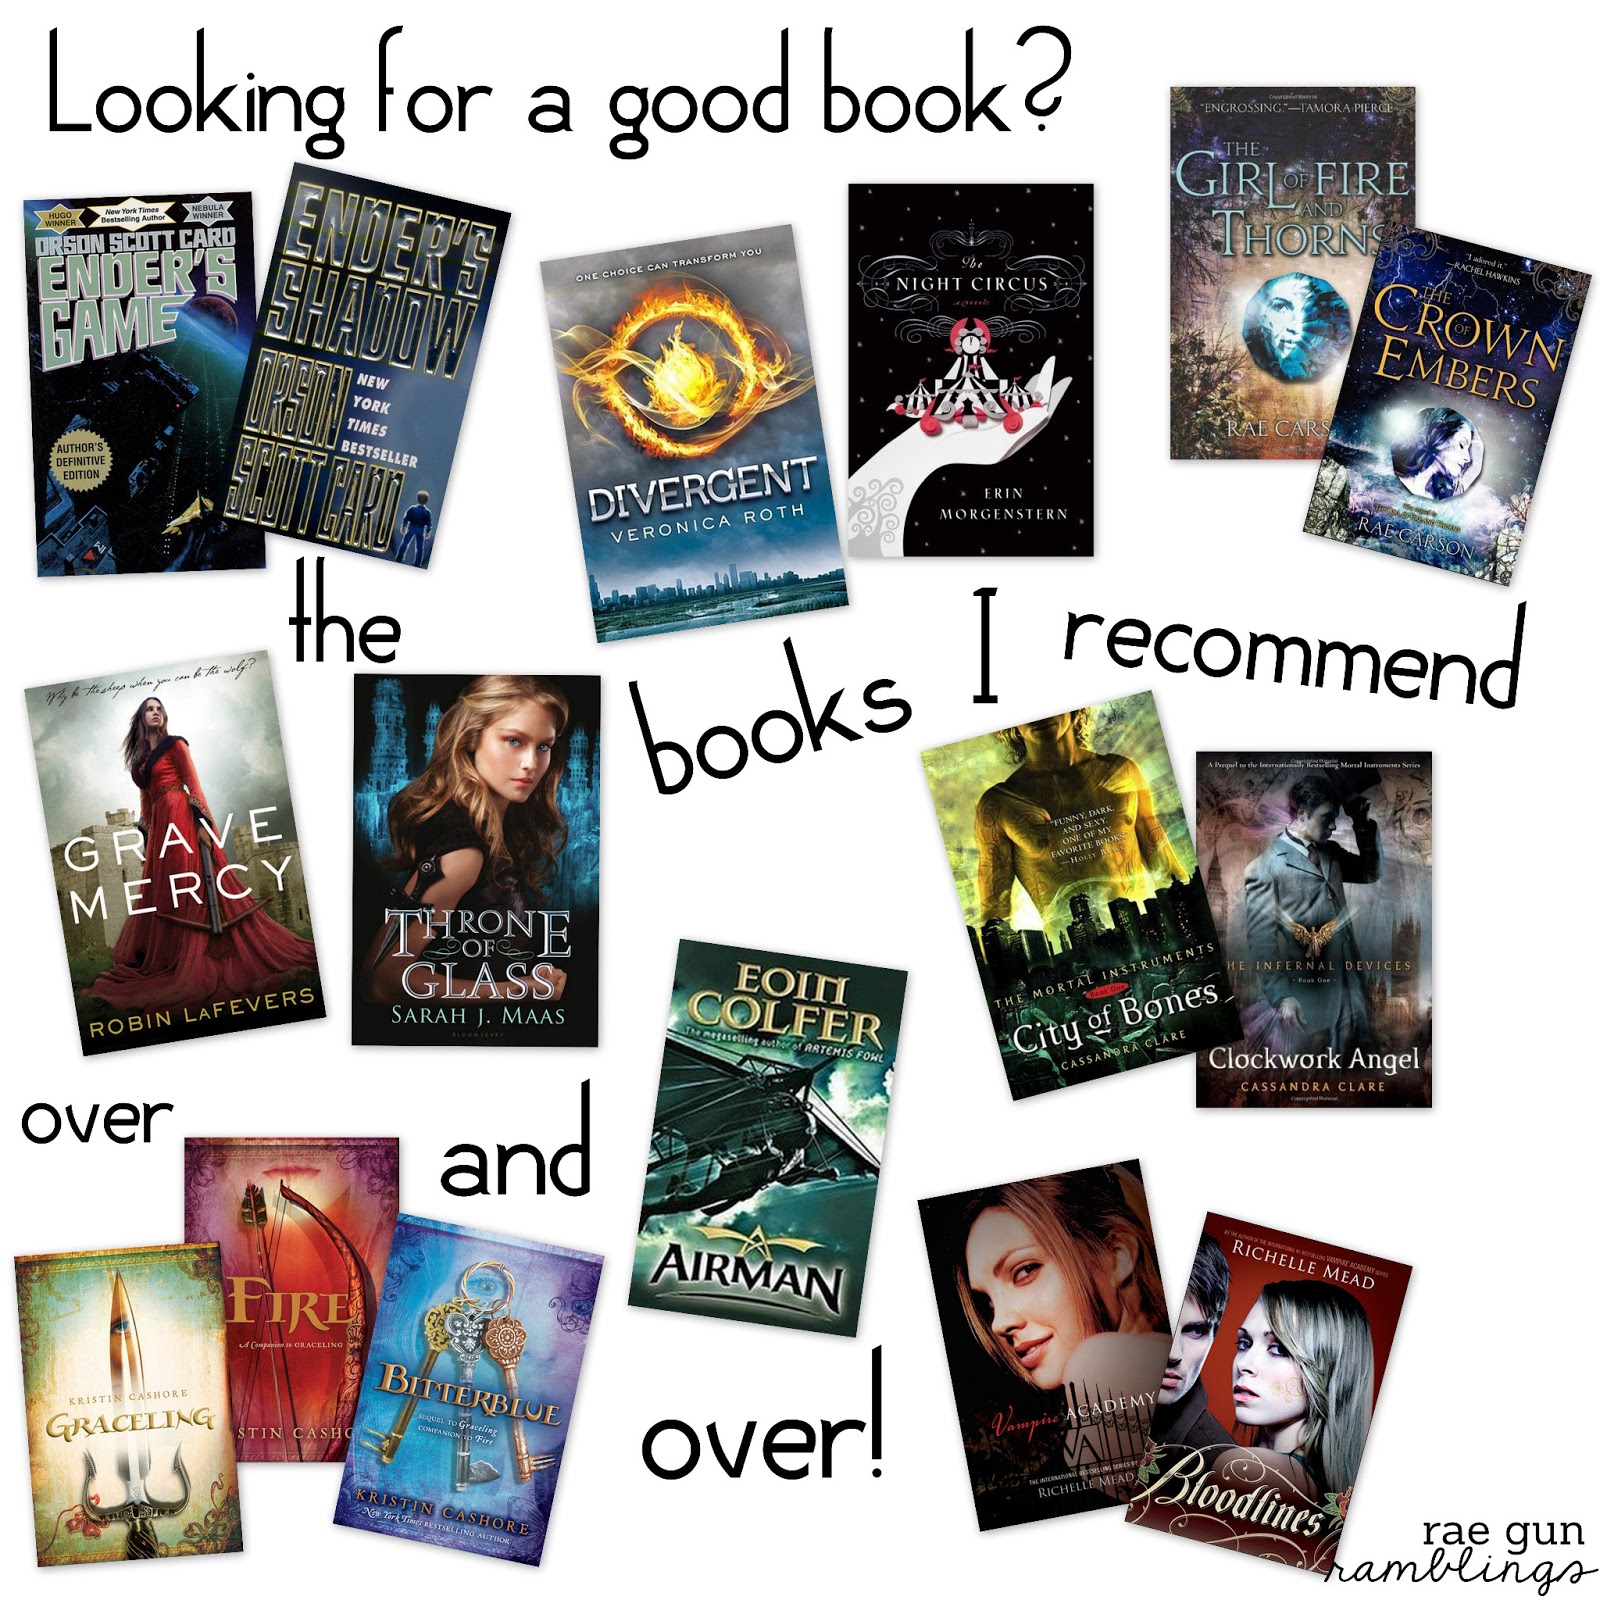 BOOK RECOMMENDATIONS